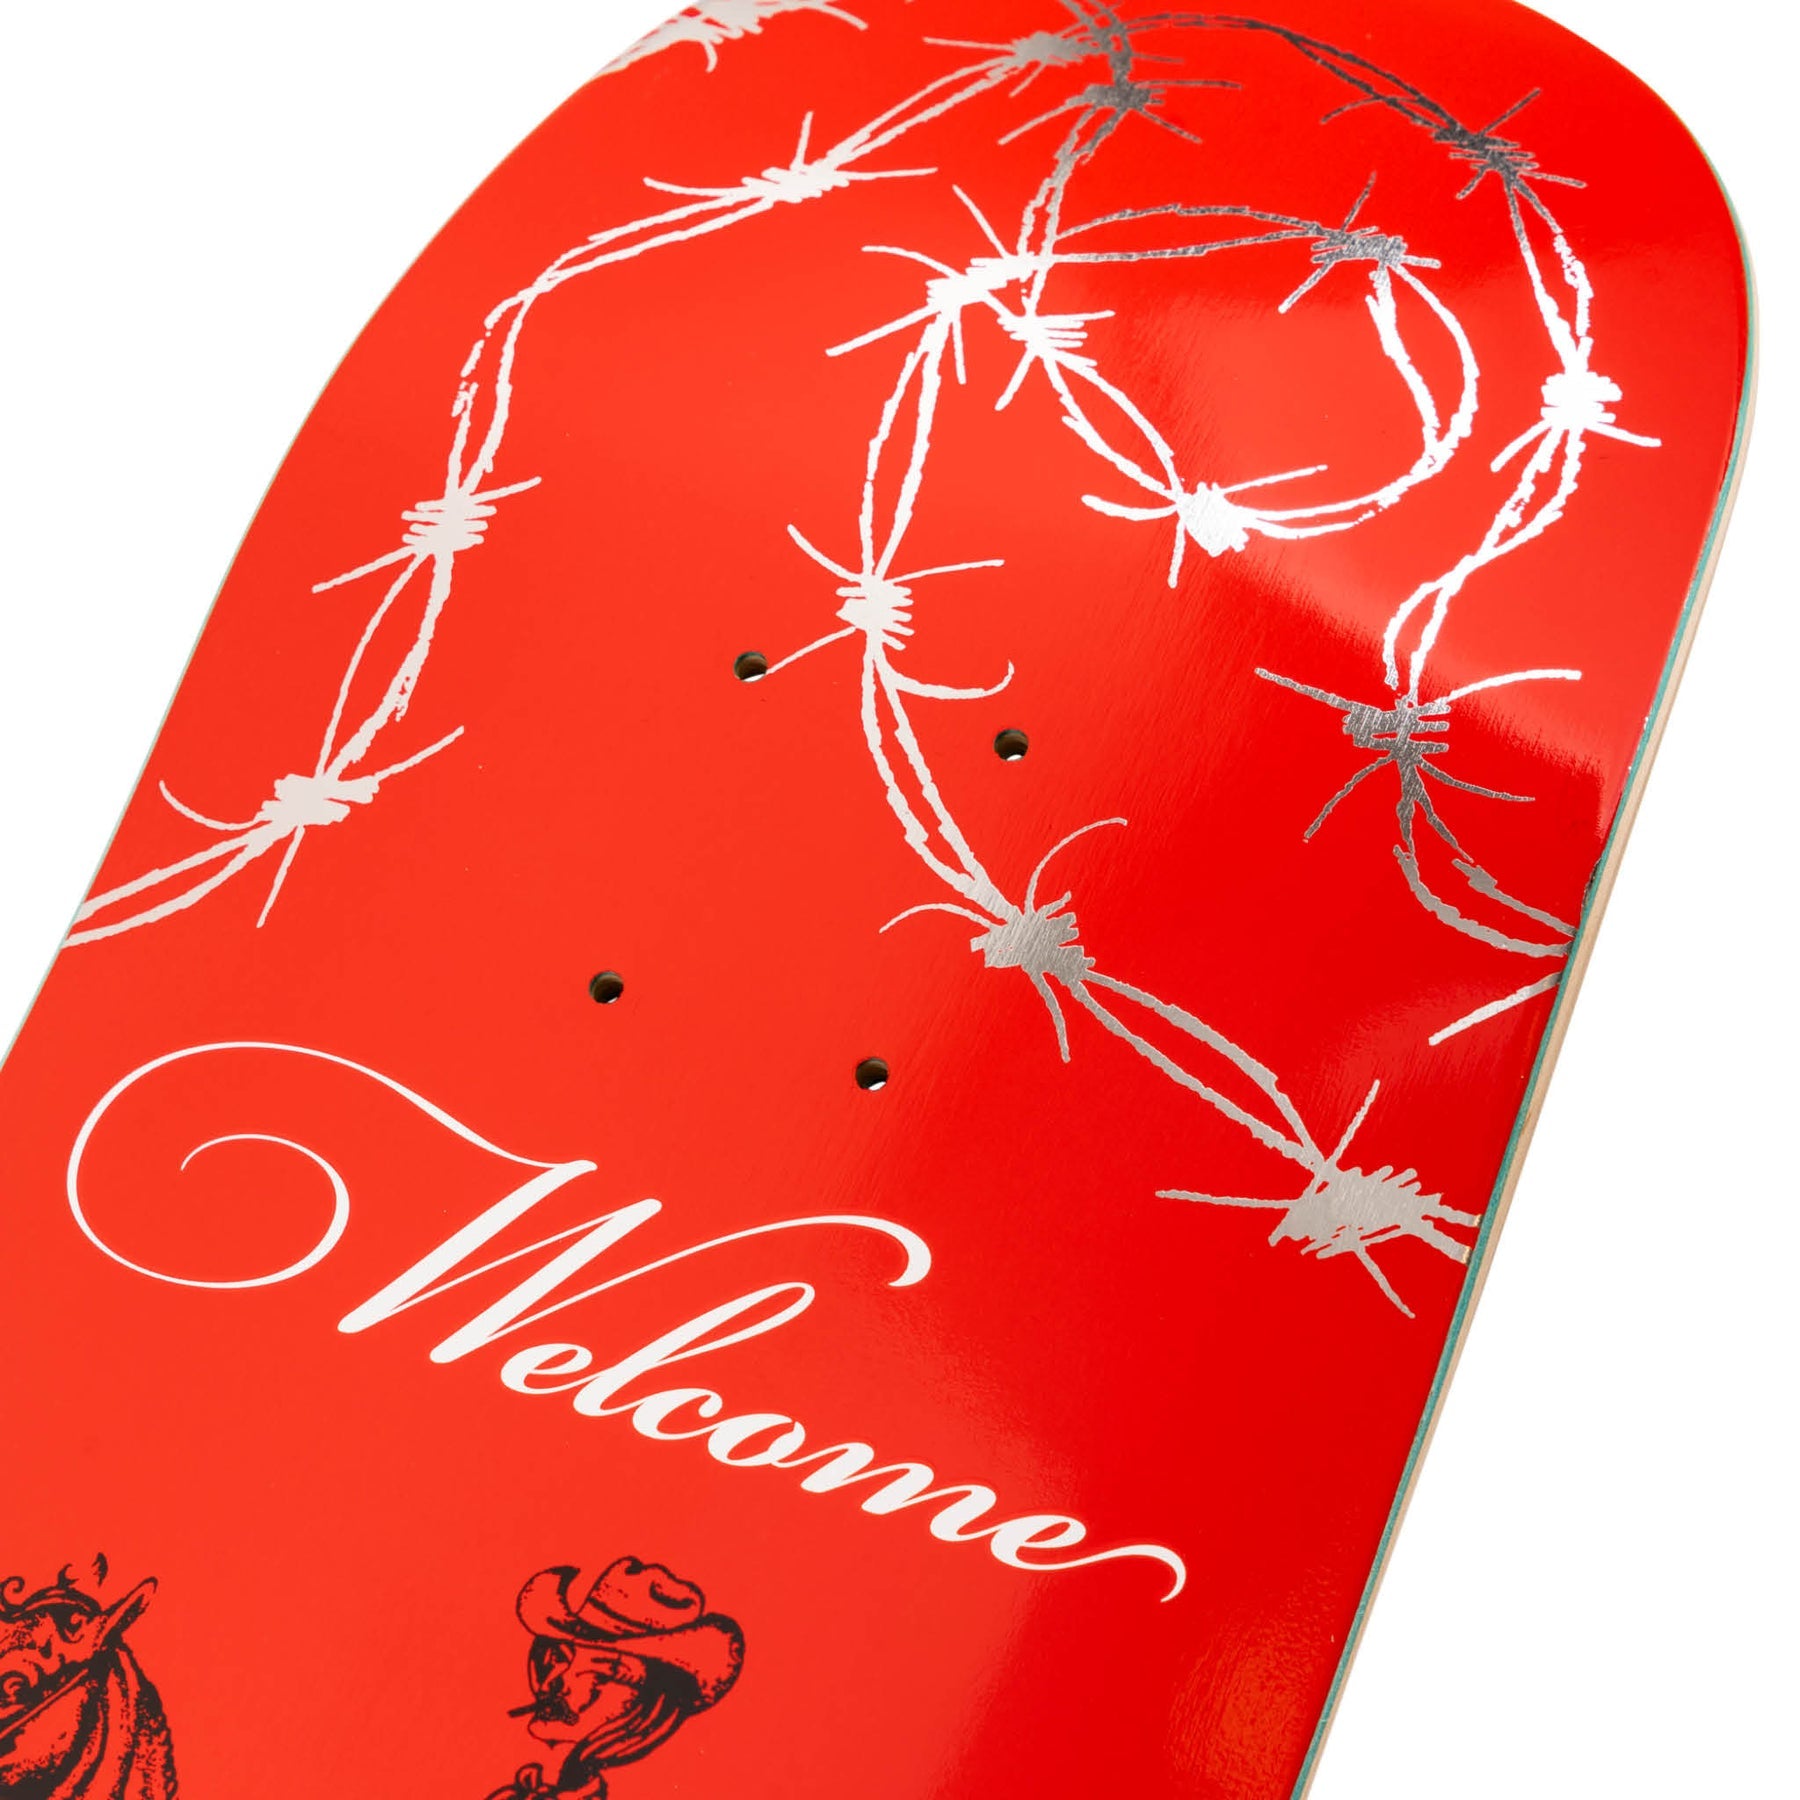 WELCOME DECK COWGIRL RYAN TOWNLEY RES/SILVER (8.5") - The Drive Skateshop